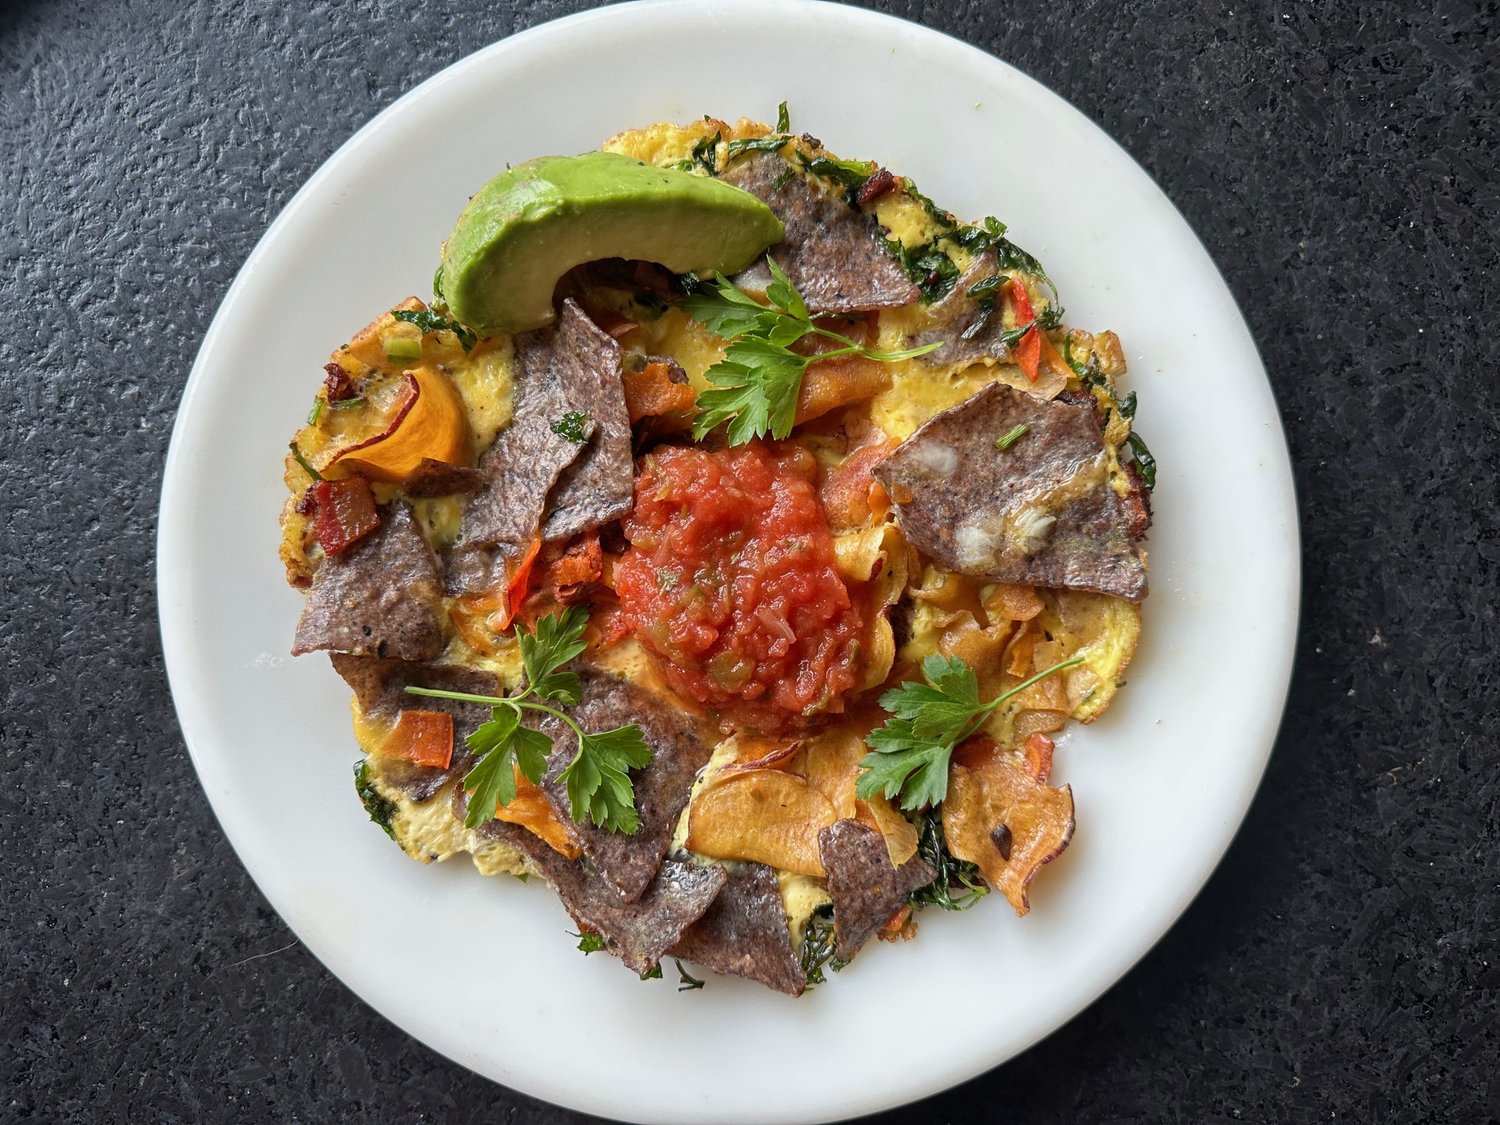 Migas, an egg-based dish originating in southern Spain and Portugal, can be made in a number of ways. This version includes bacon, garlic, parsley, cheese, tortilla chips, vegetable chips and a dollop of salsa to top it all off.